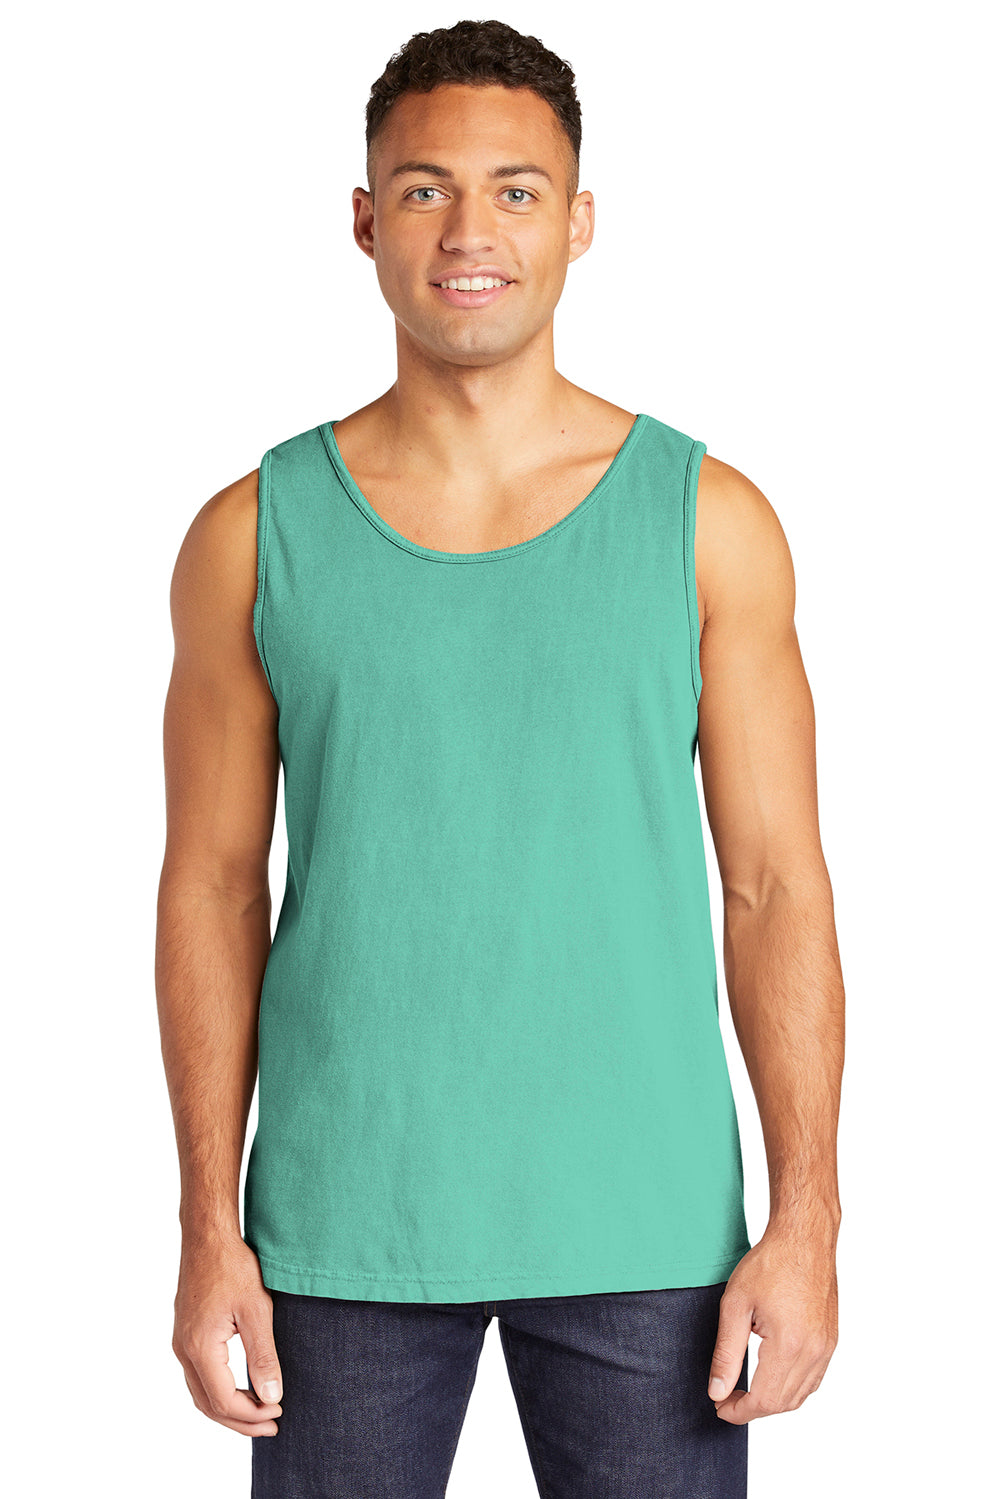 Comfort Colors 9360/C9360 Mens Tank Top Chalky Mint Green Front